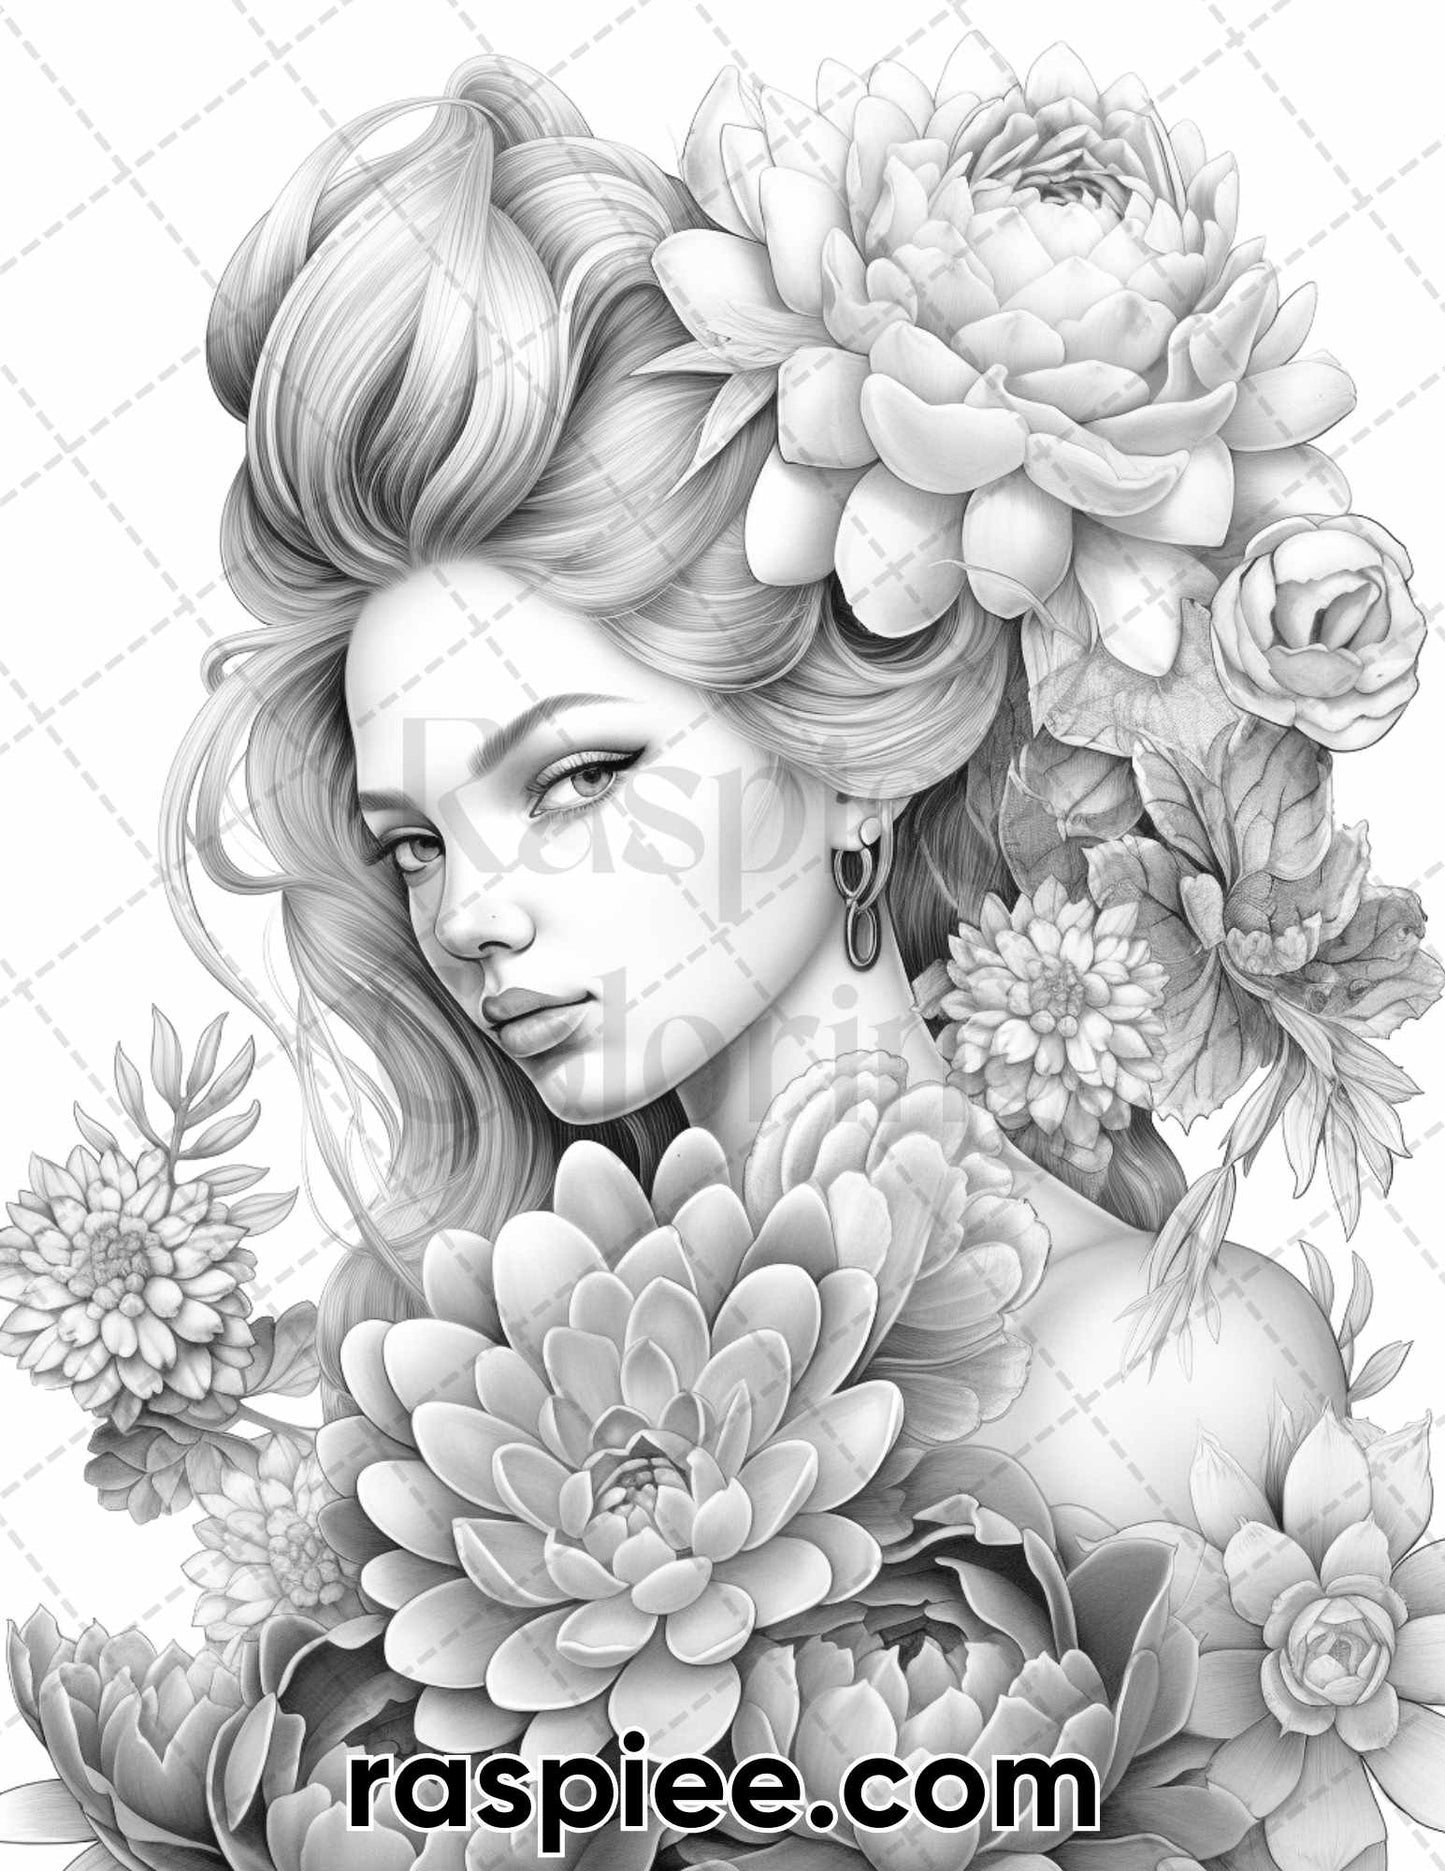 adult coloring pages, adult coloring sheets, adult coloring book pdf, adult coloring book printable, grayscale coloring pages, grayscale coloring books, portrait coloring pages, portrait coloring book, flower coloring pages for adults, flower coloring book pdf, spring coloring pages for adults, spring coloring book pdf